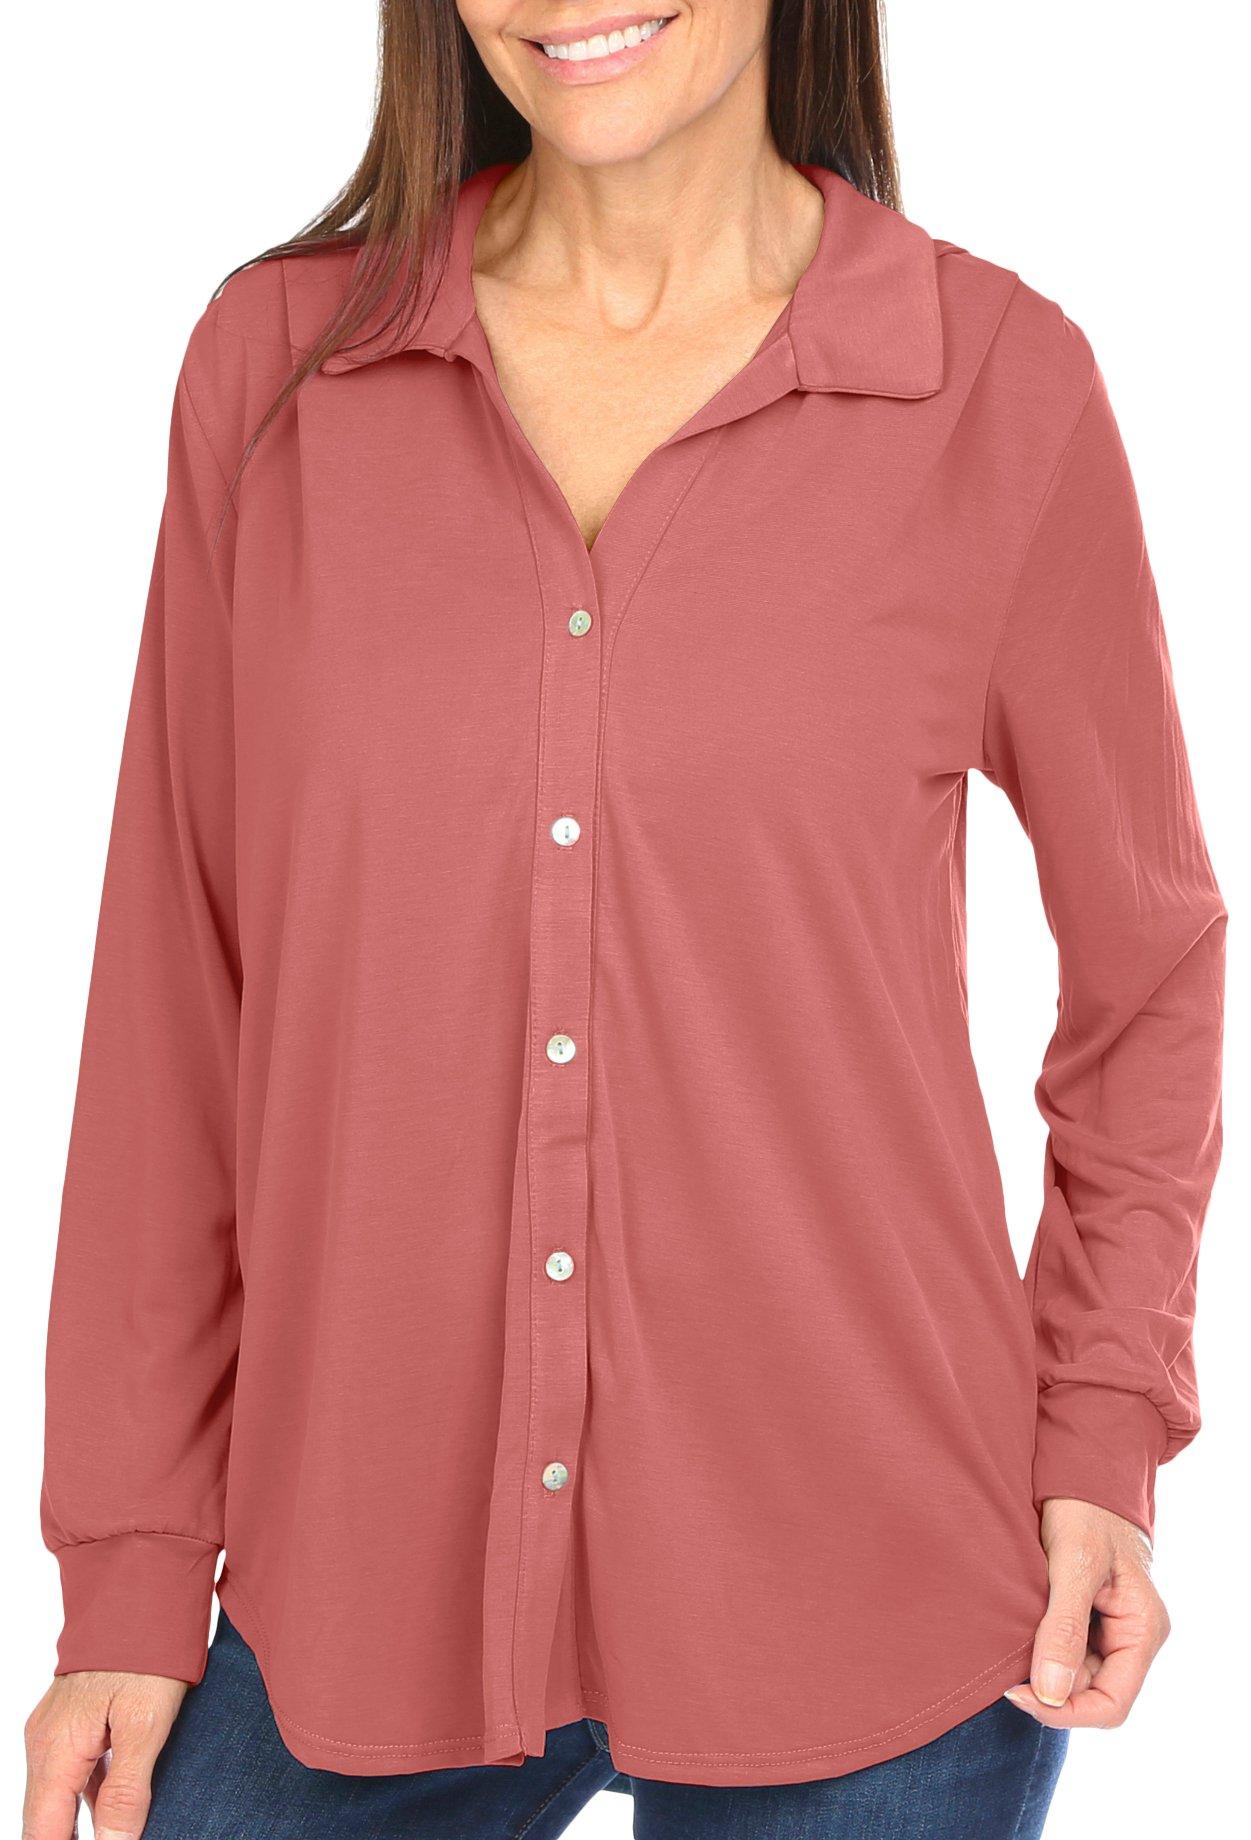 Womens Classic Solid Button Down Long Sleeve Top